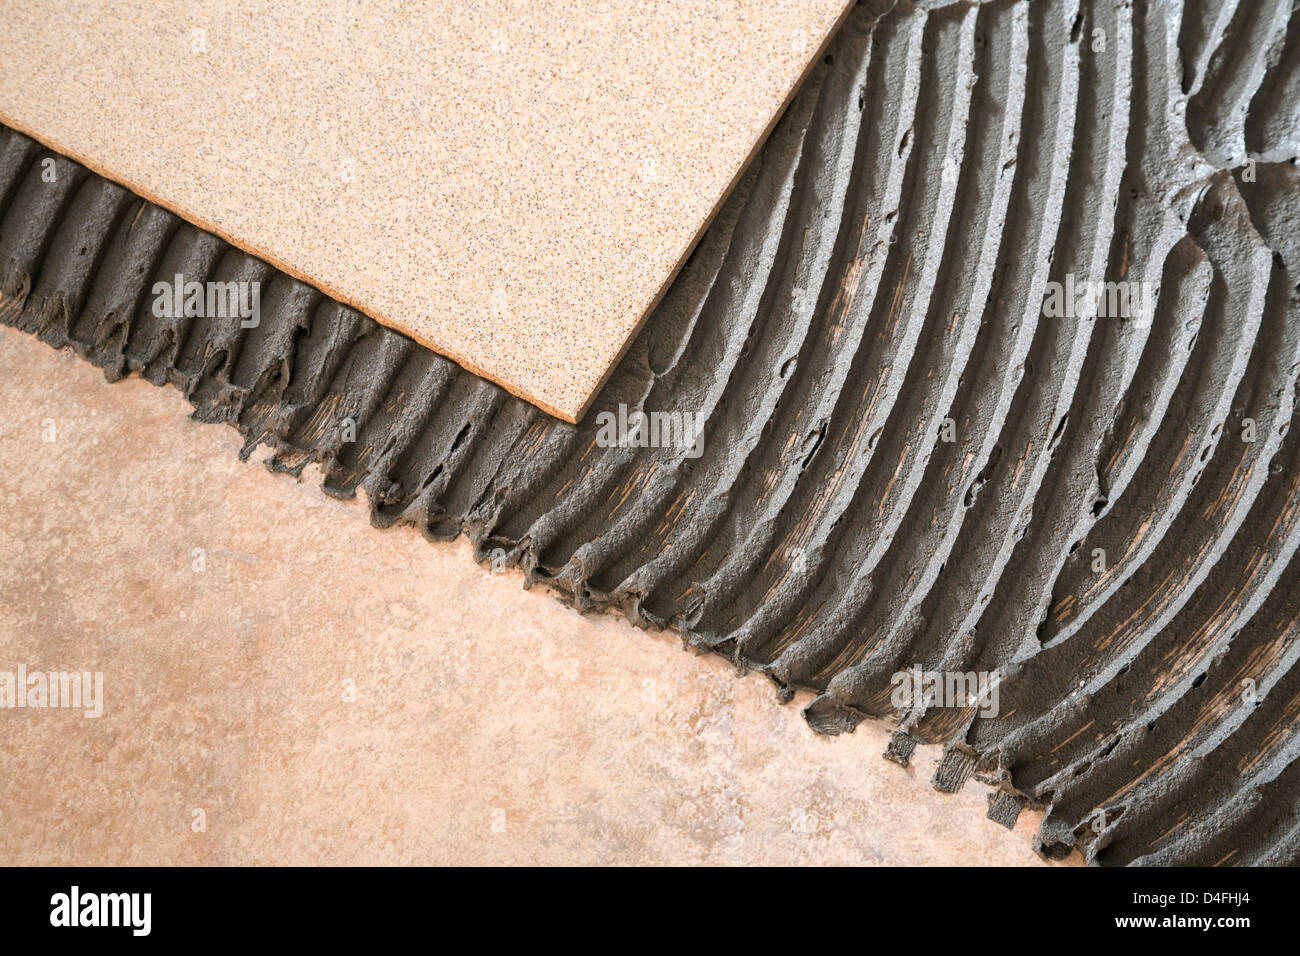 mounting plate on the under layer of tile adhesive Stock Photo